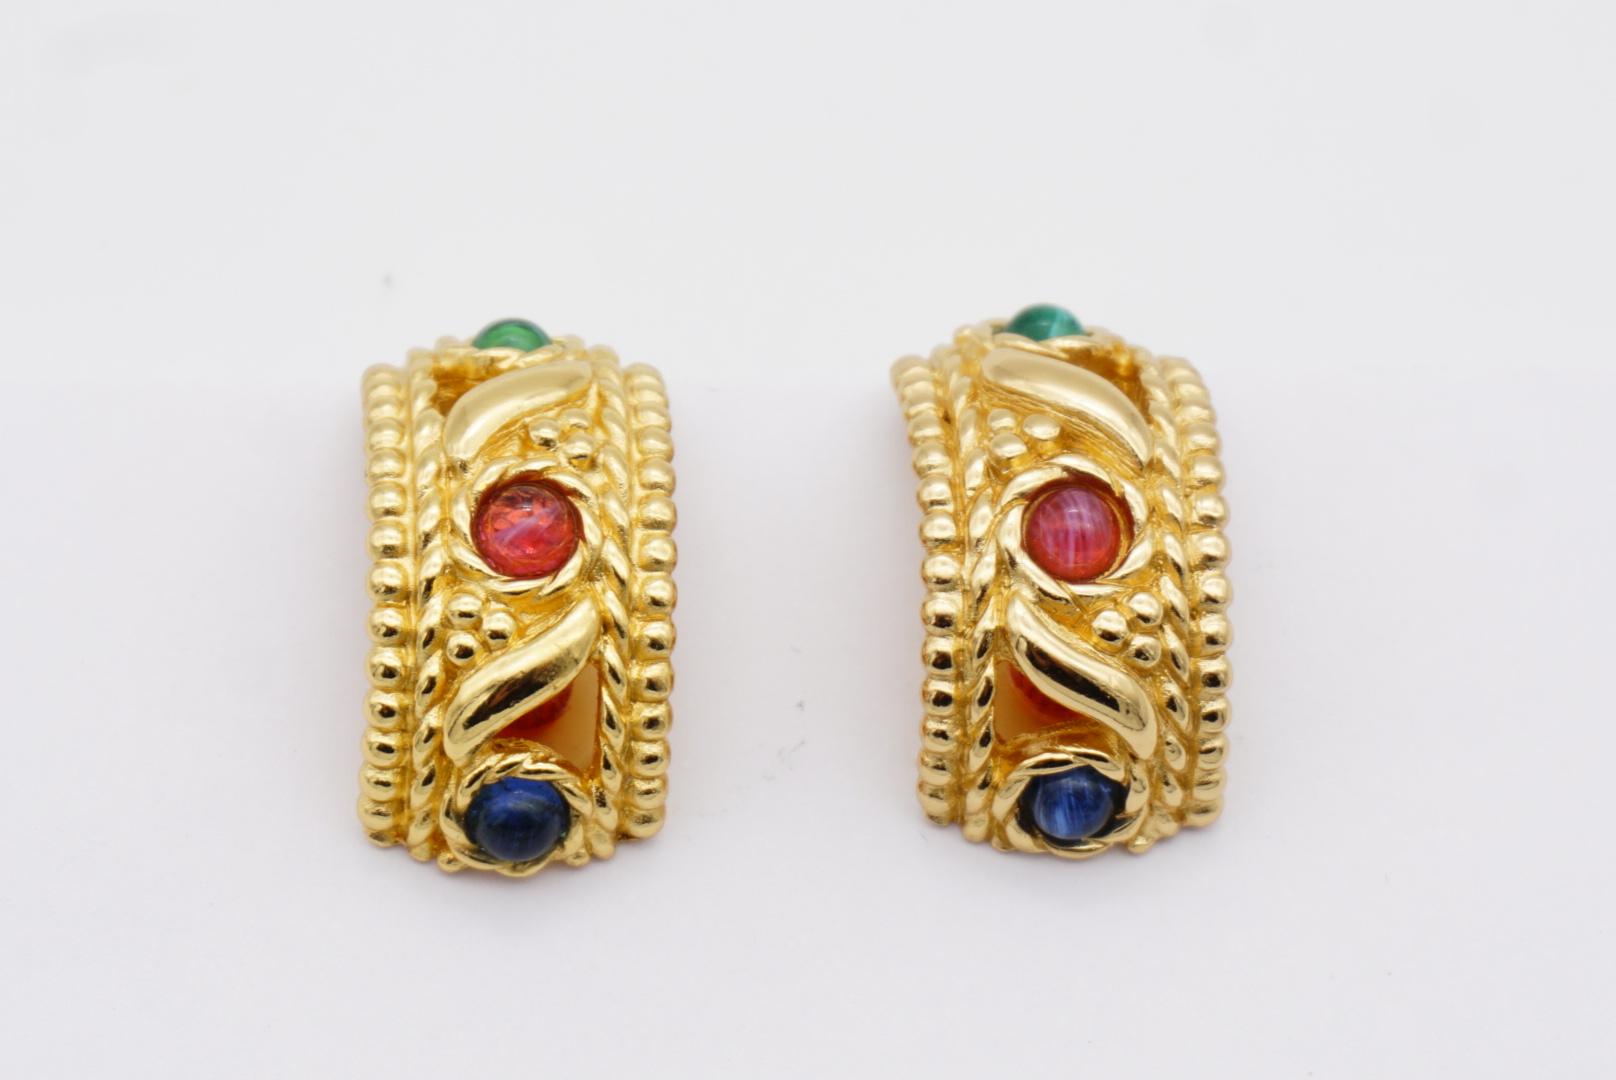 Christian Dior Vintage 1970s Baroque Gripoix Emerald Sapphire Ruby Clip Earrings For Sale 5